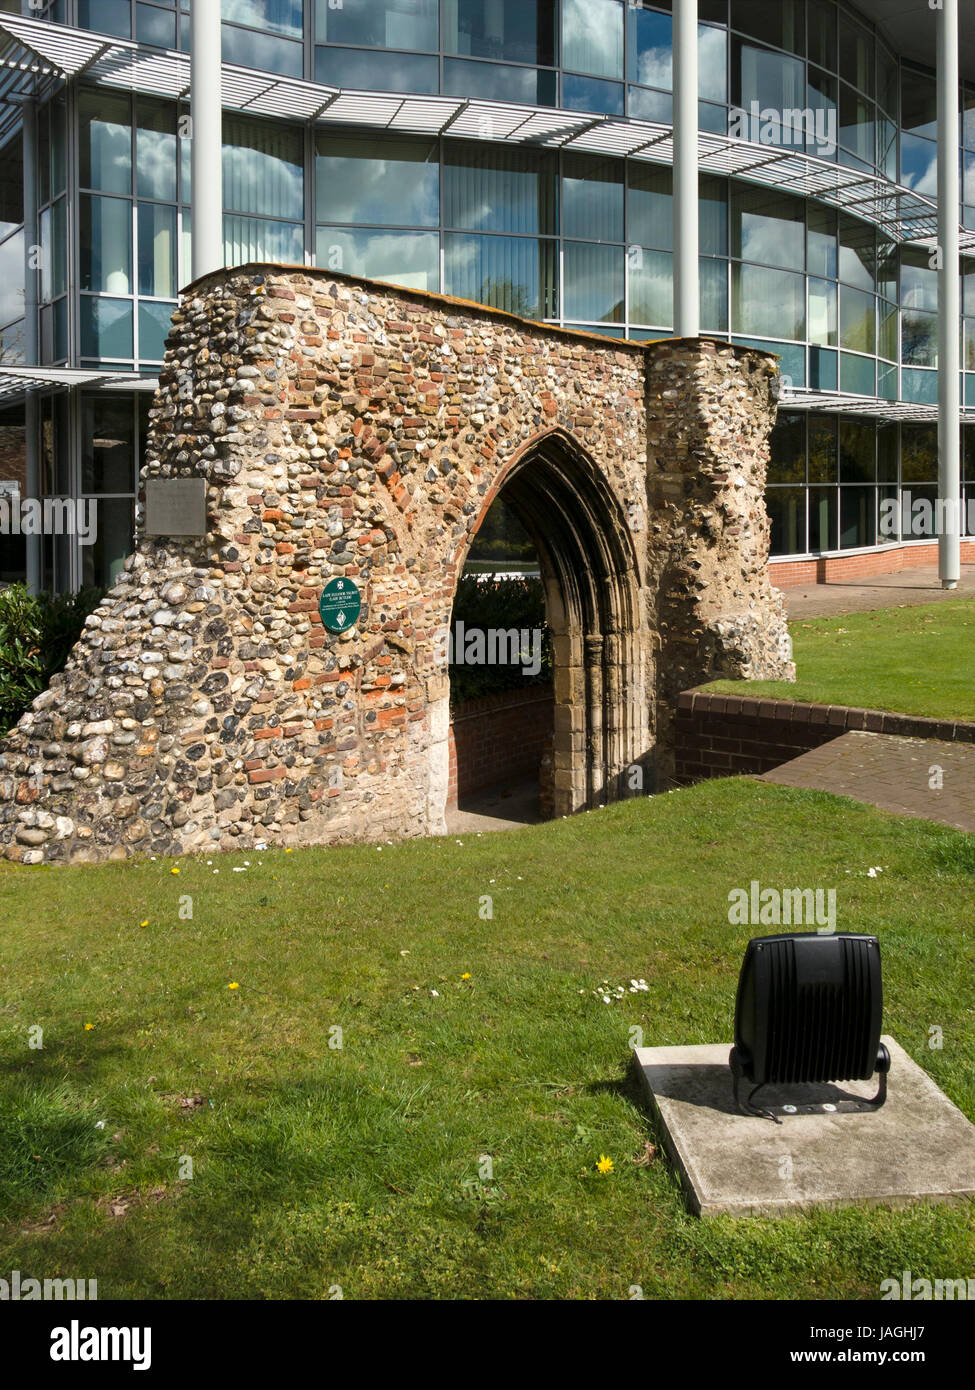 Ancient and modern. Archway in old ruins of Whitefriars Carmelite Priory and modern glass fronted Mills & Reeve building, Norwich, England, UK Stock Photo